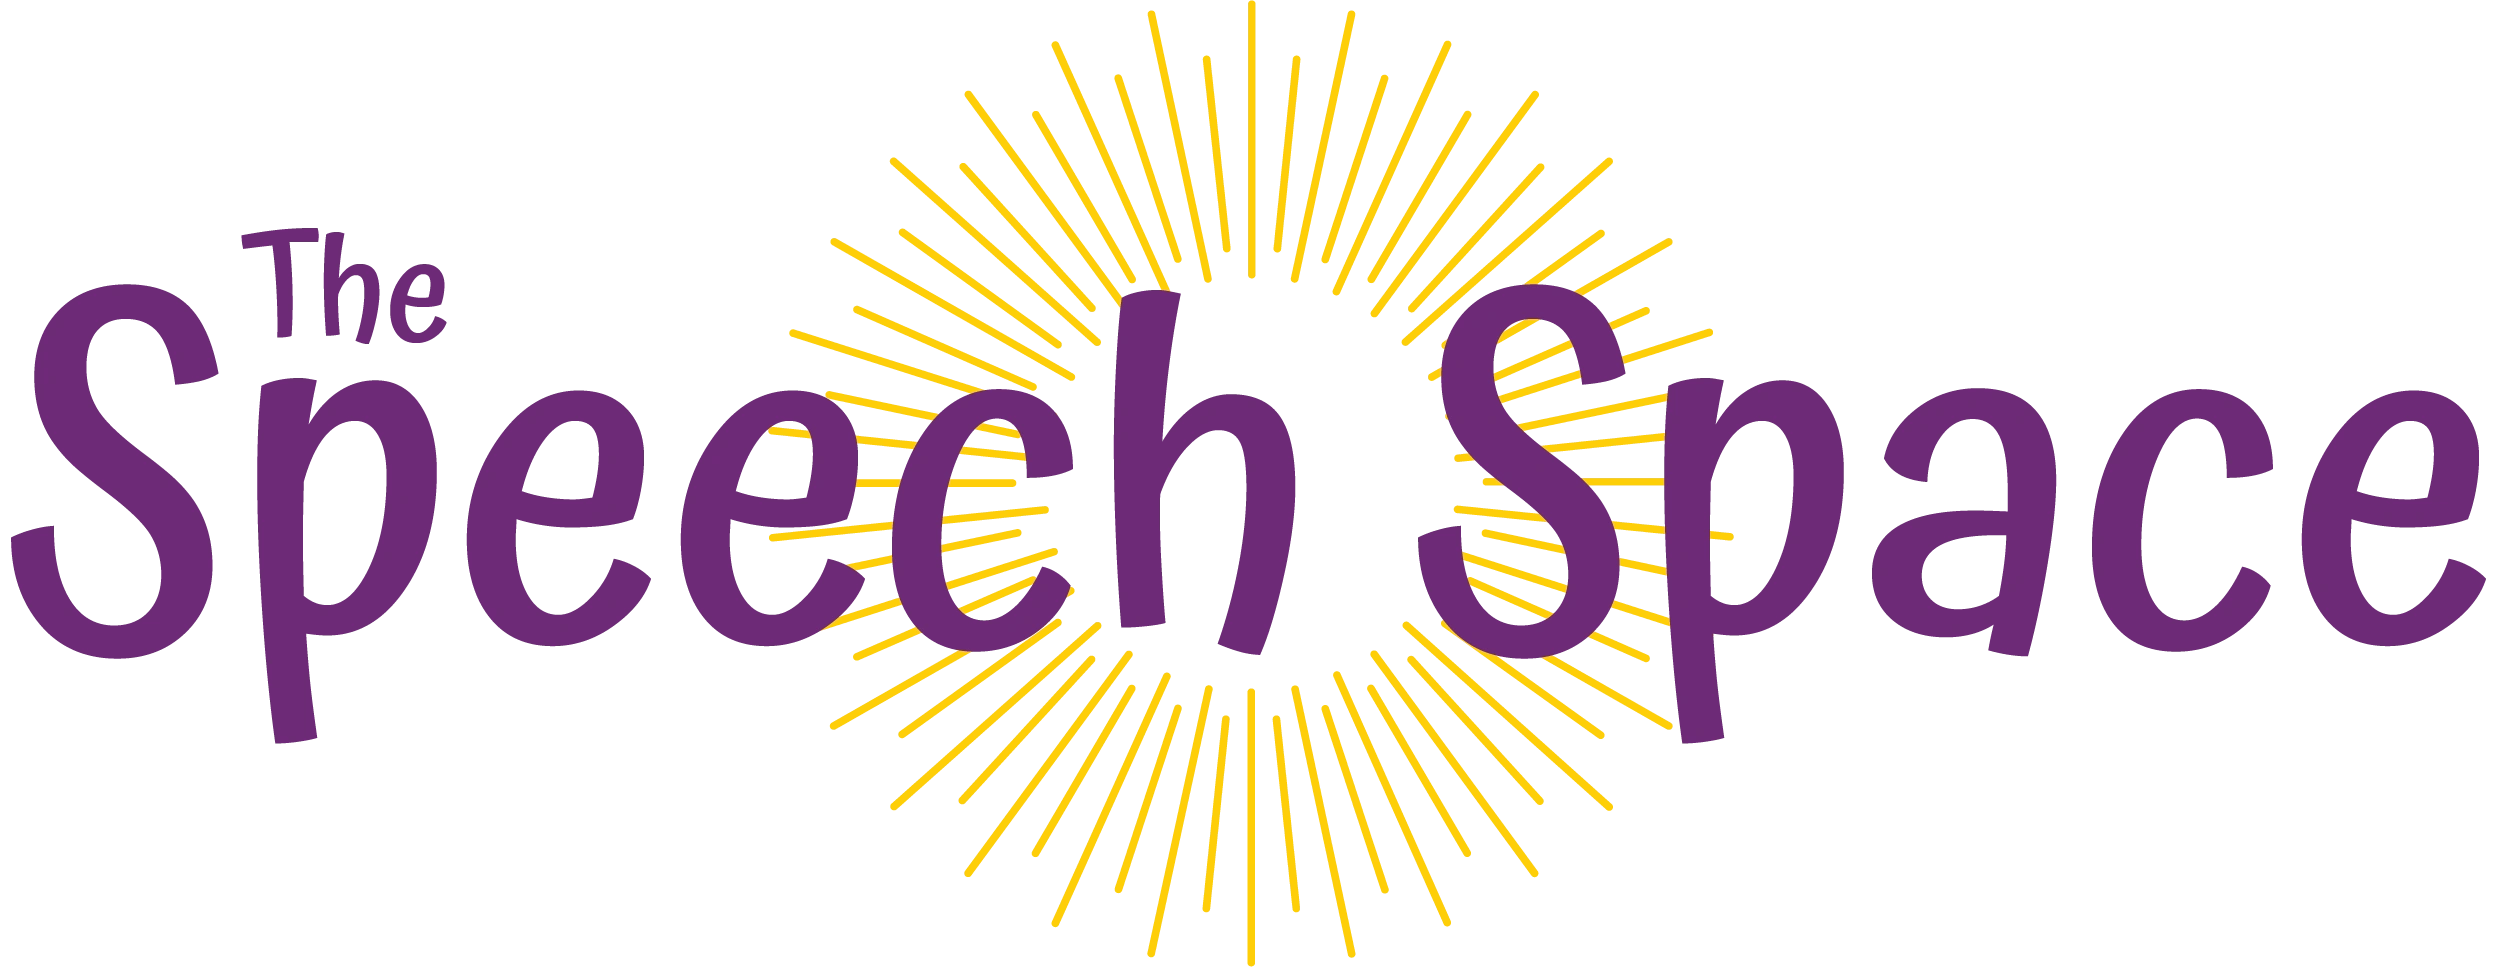 Logo of The Speech Space. Purple font "The Speech Space" with sun image background.